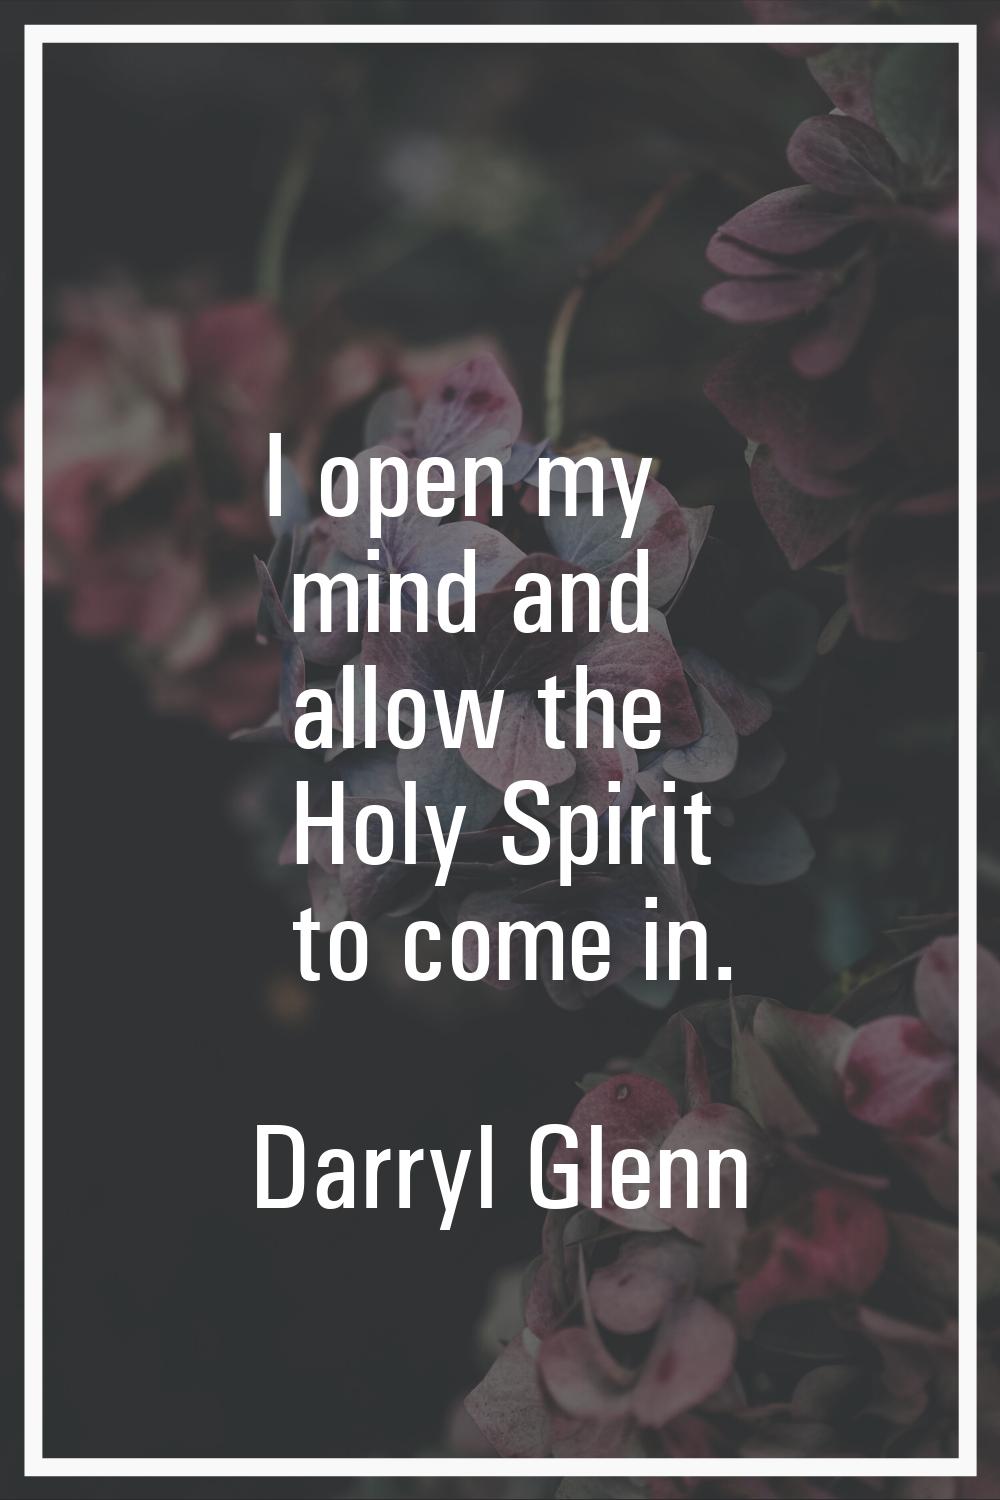 I open my mind and allow the Holy Spirit to come in.